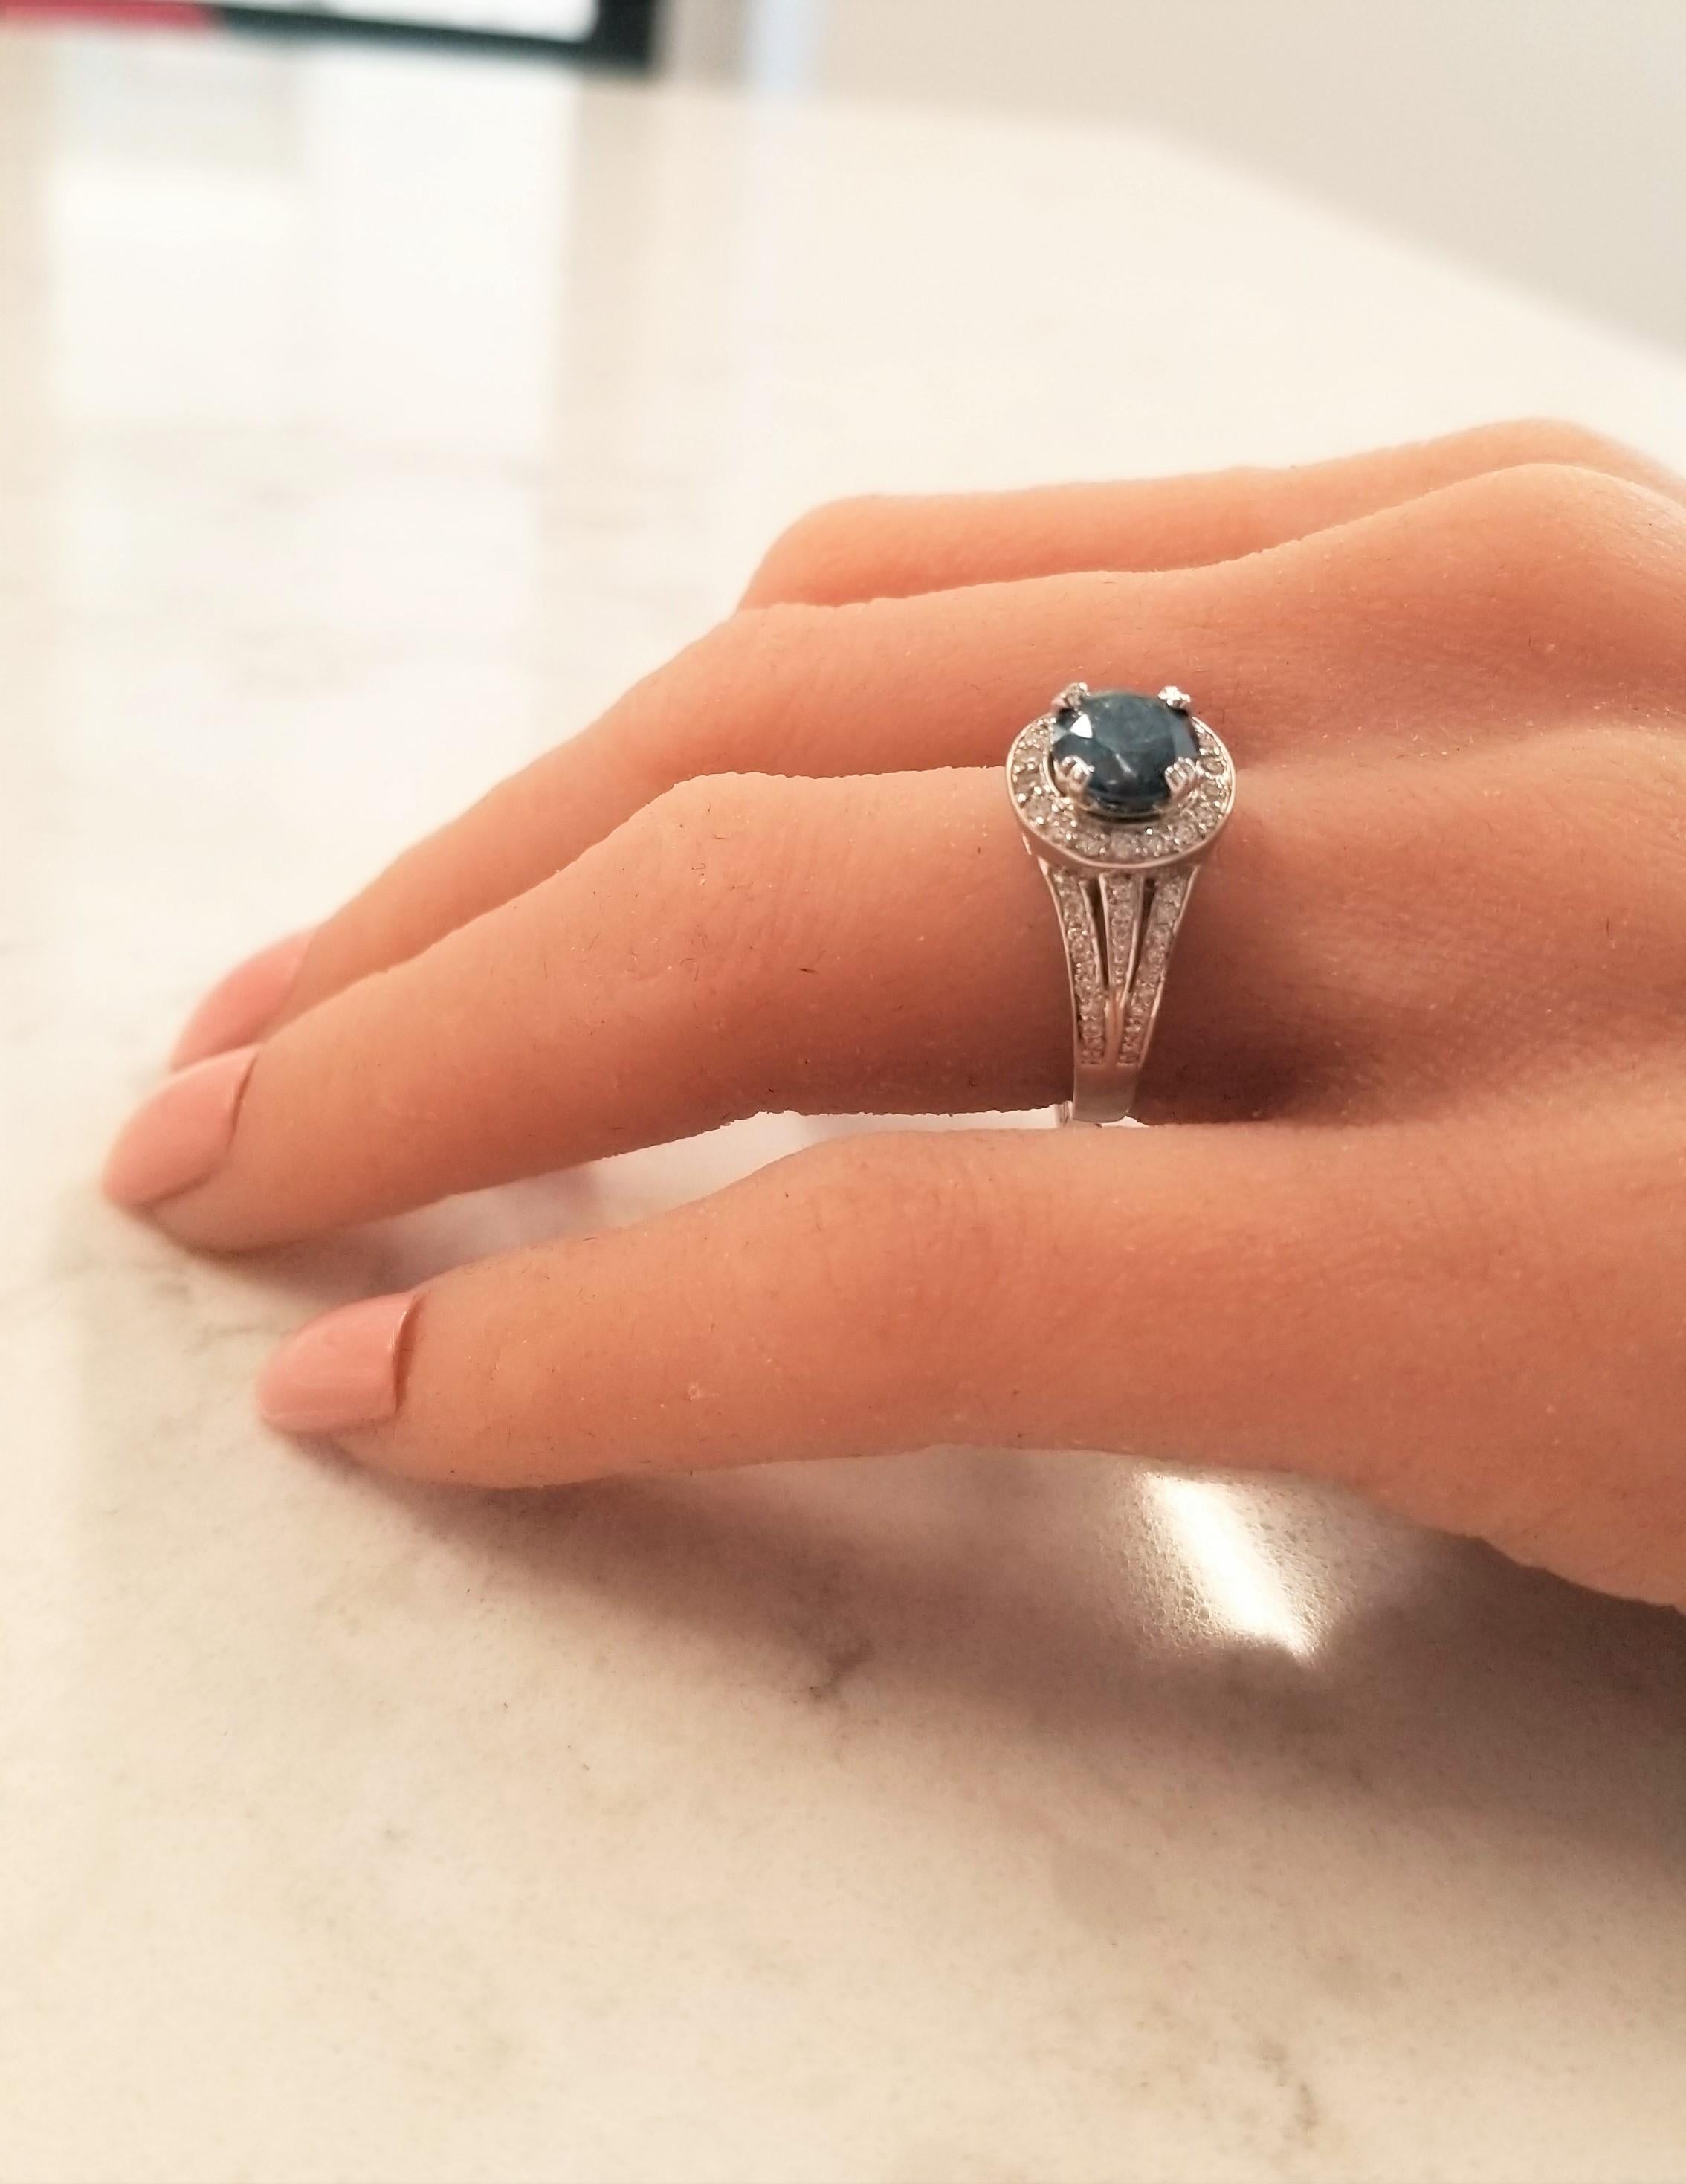 Looking for a beautiful colored gemstone that is as hard as a diamond? Your best choice is an irradiated fancy vivid blue diamond. This elegant ring features a 1.65 carat round irradiated blue diamond that is enhanced by a glittering halo of bead